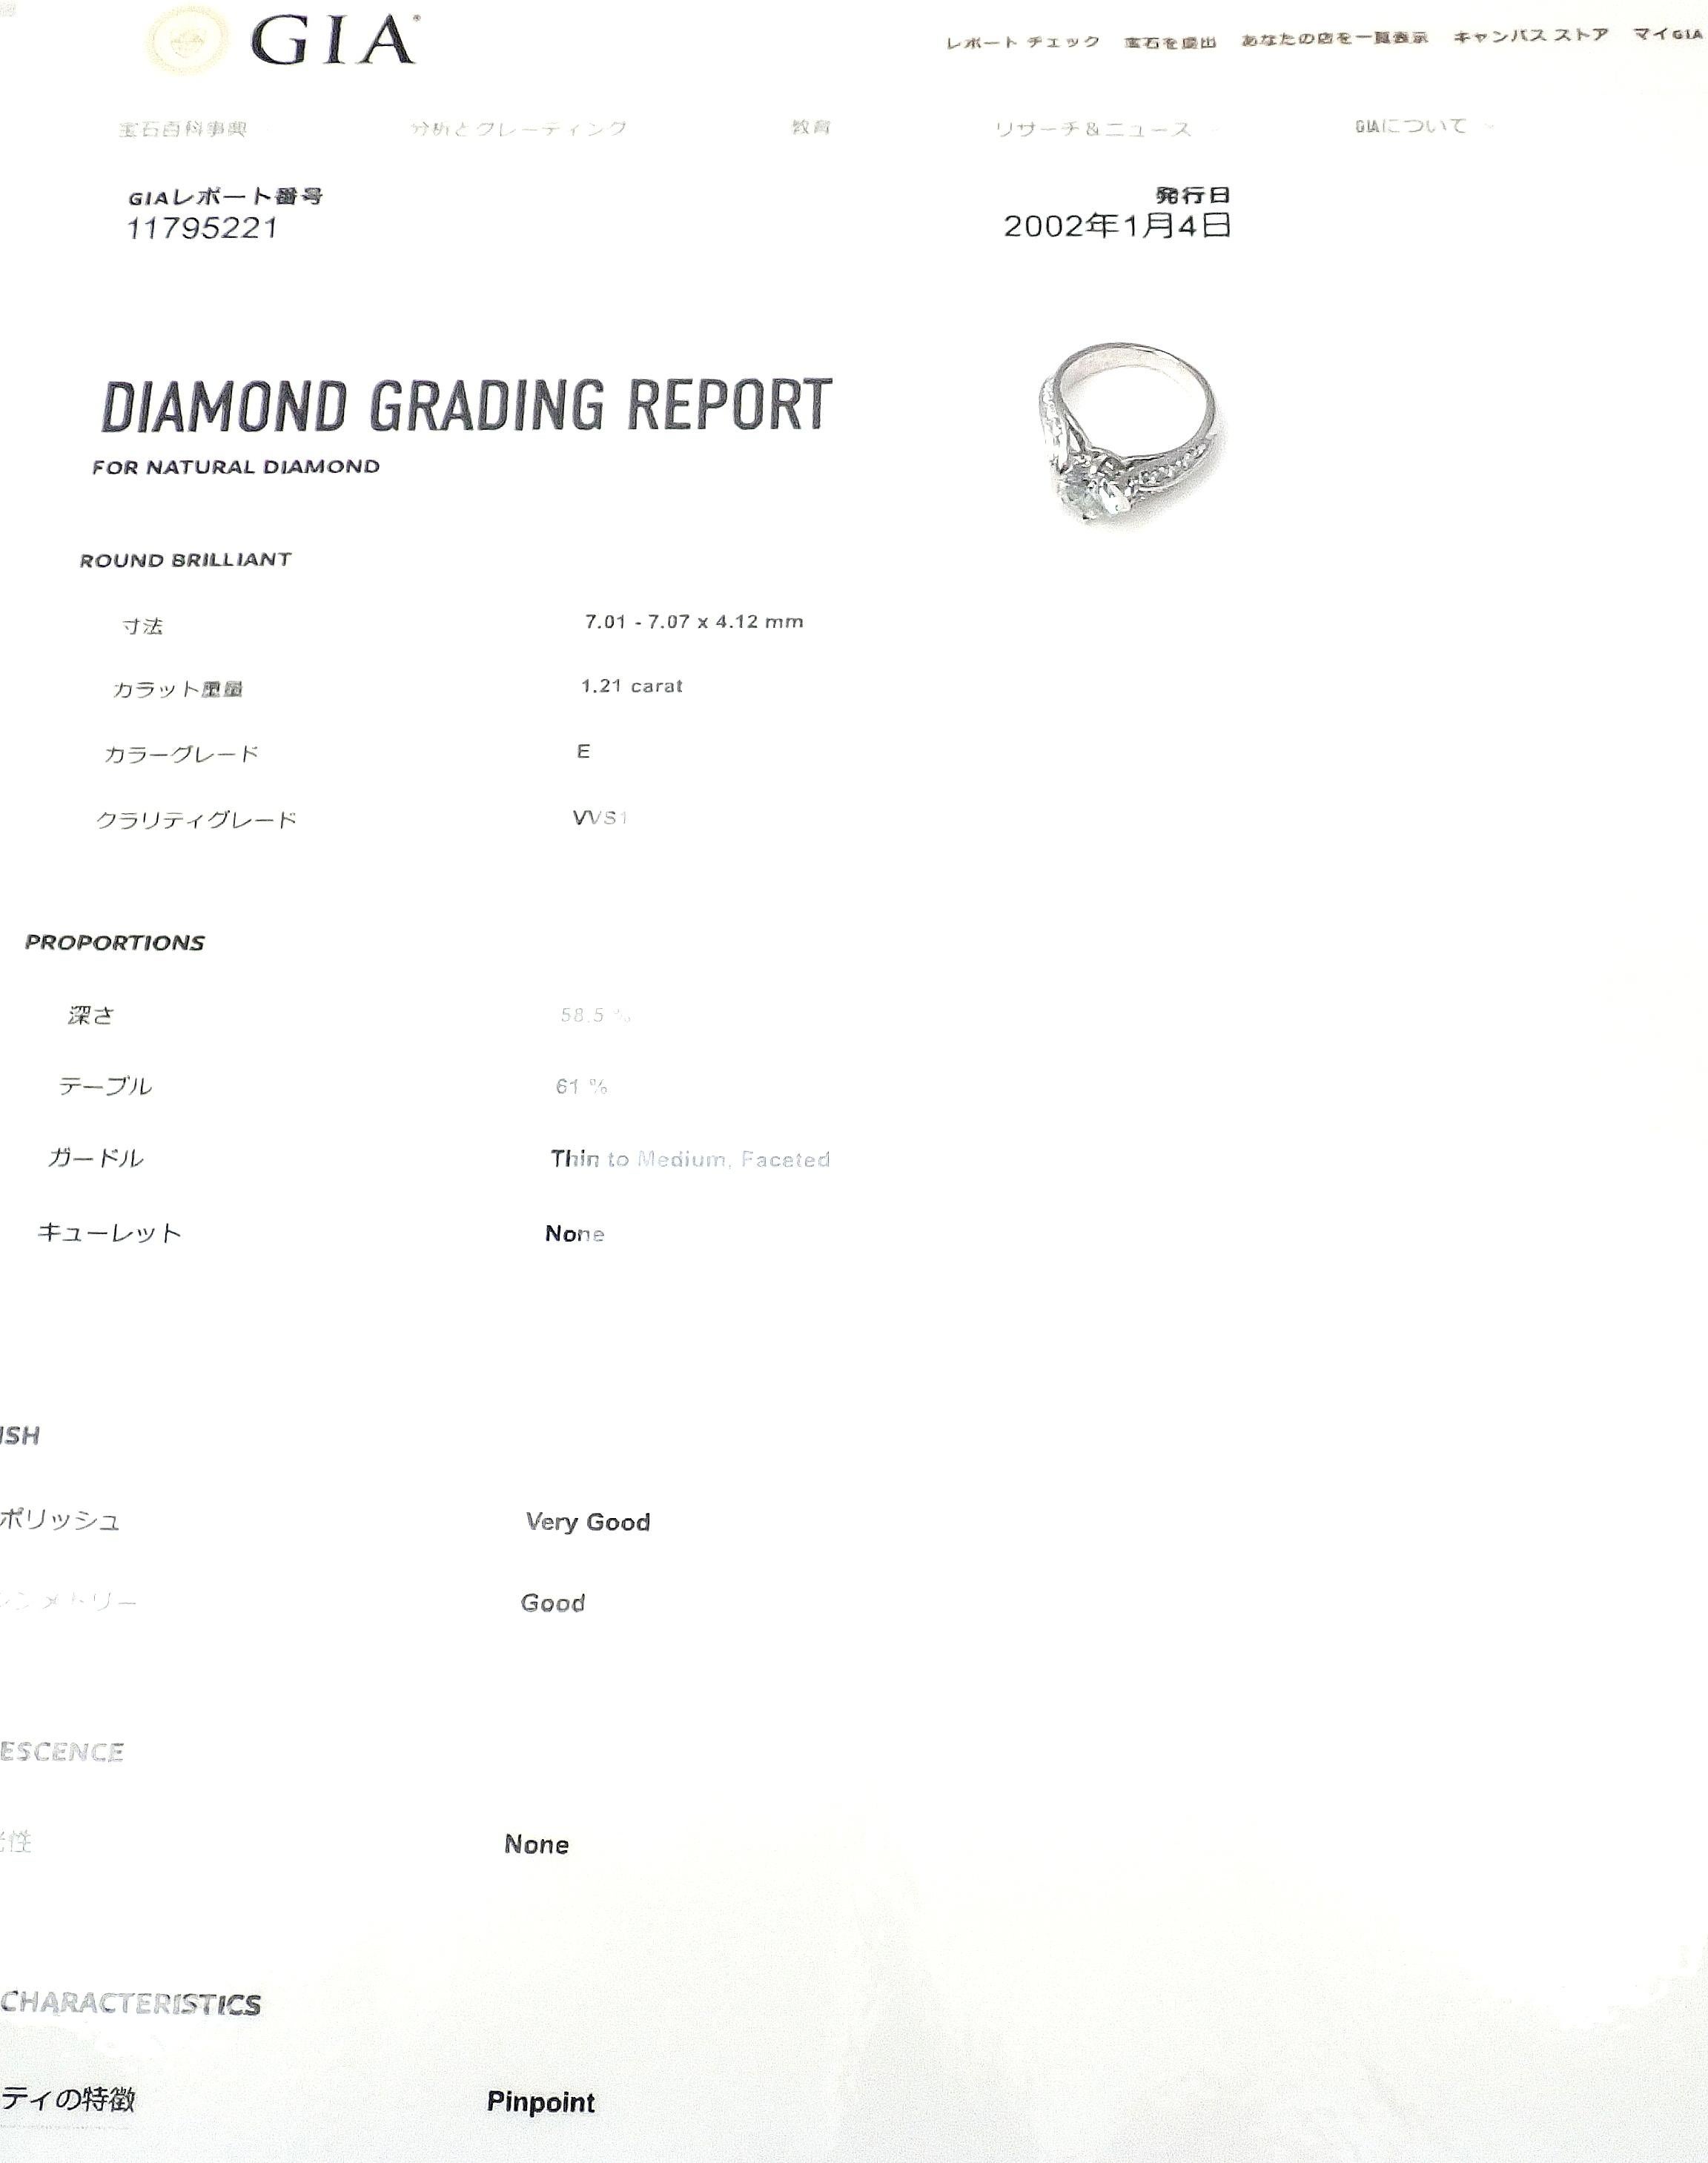 Authentic Van Cleef & Arpels Platinum 1.88 Carat VVS1 E Diamond Ring GIA In Excellent Condition For Sale In Holland, PA